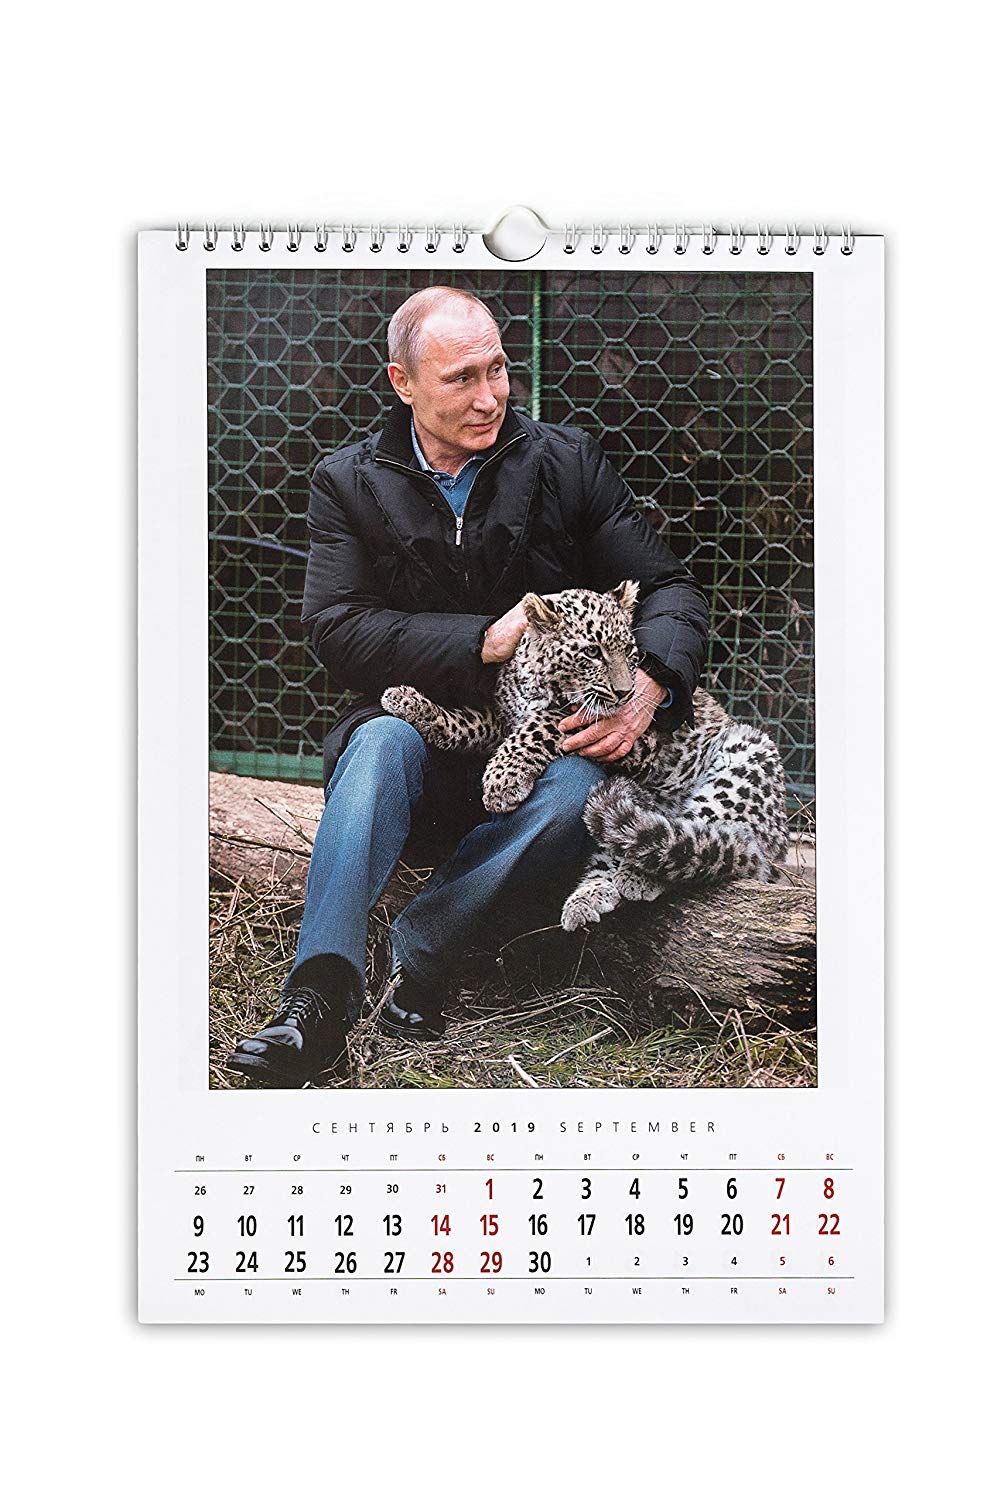 Putin's 2019 Calendar Is Here And It's As Bizarre As You'd Hope